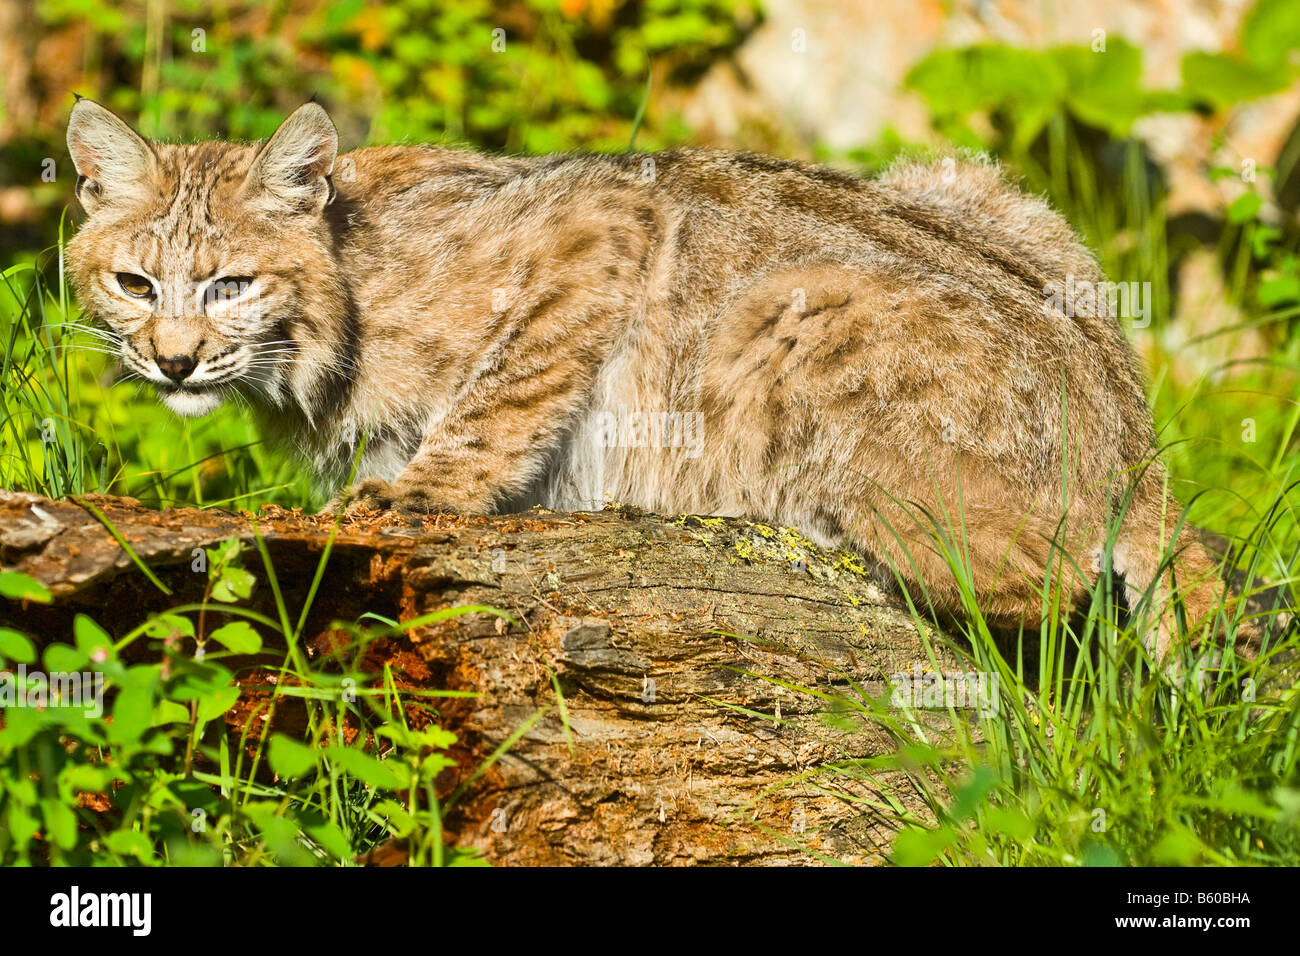 Bobcat alert and crouched on a rotted log in a wooded environment - controlled conditions Stock Photo